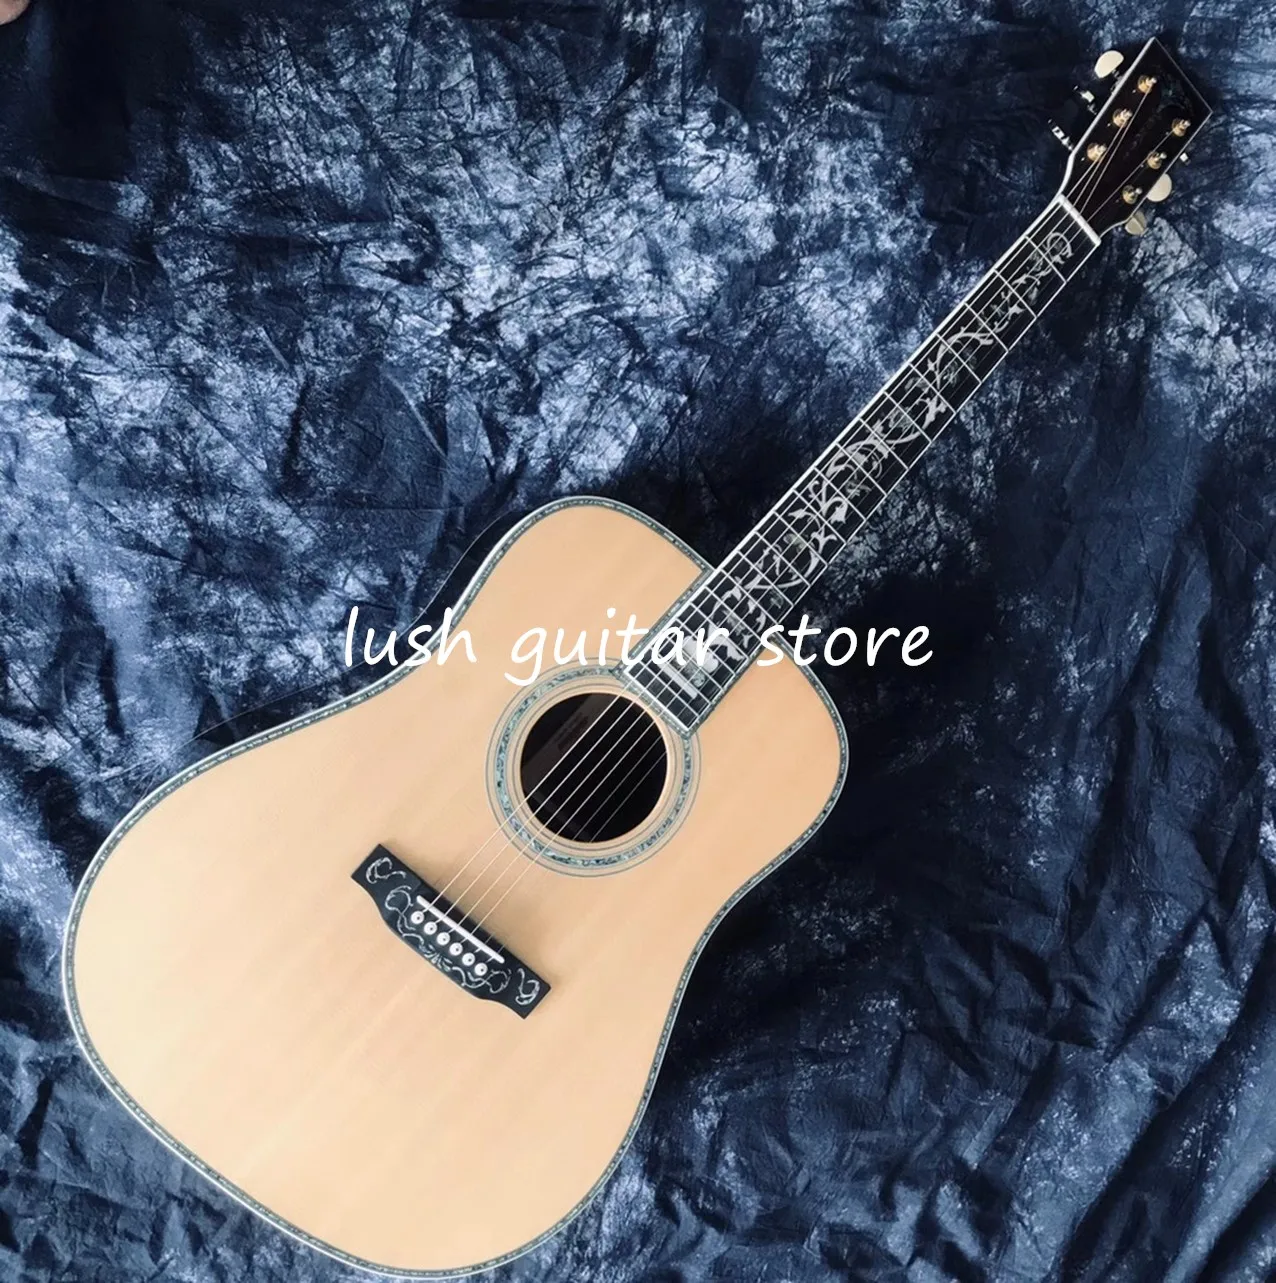 

Factory custom 41 inch D style acoustic guitar,Solid Spruce, Ebony fingerboard Guitarra,Abalone flower inlay,Free Shipping